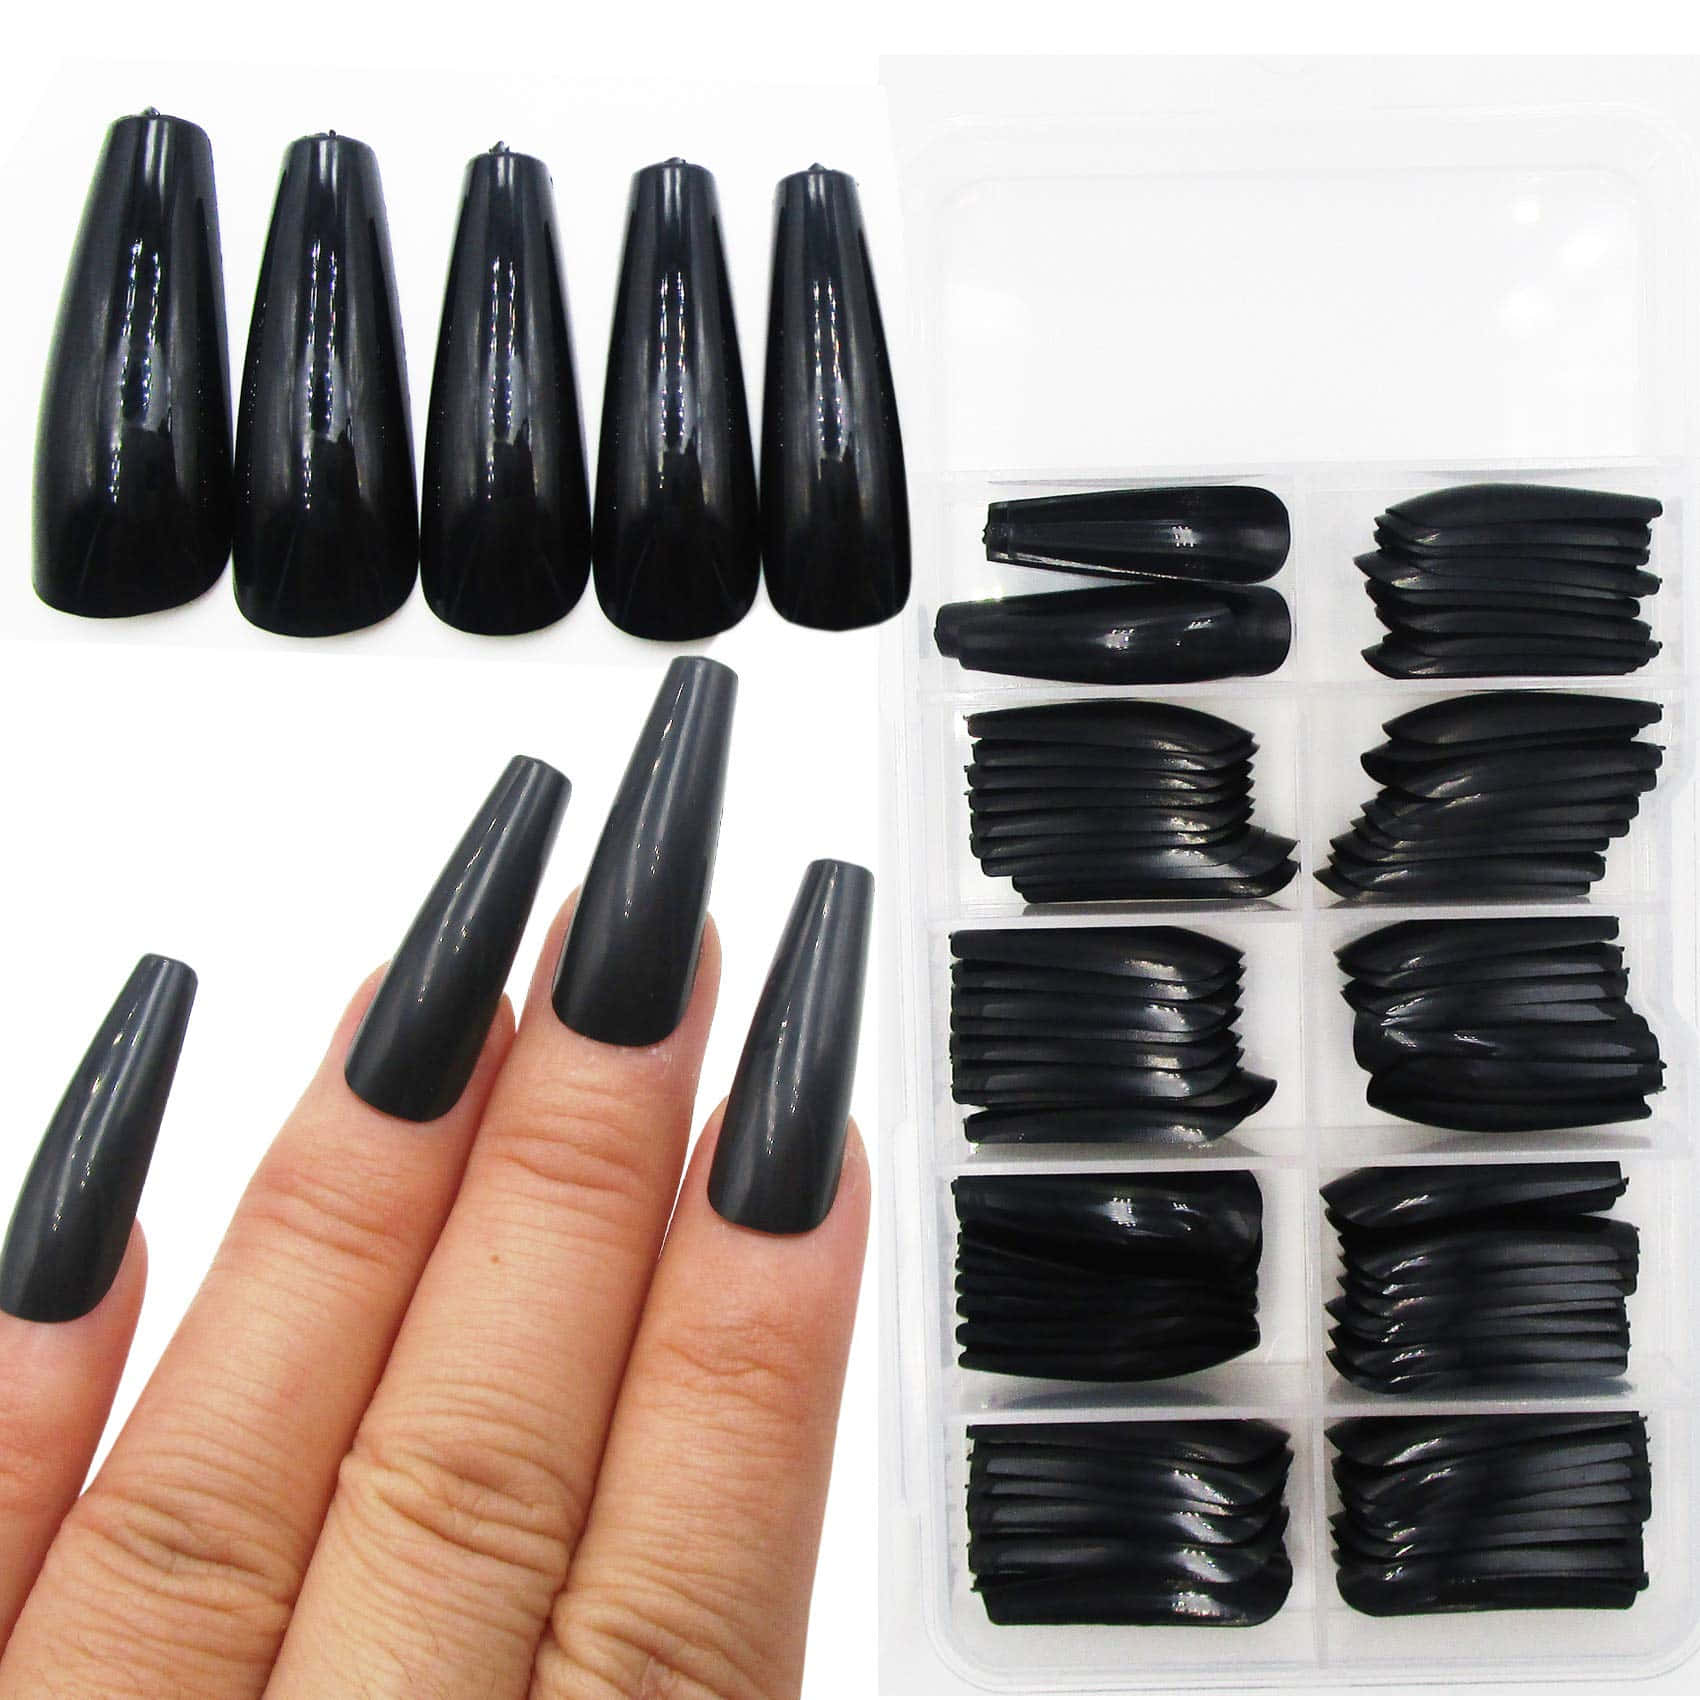 Black Acrylic Nails With Black Tips In A Box